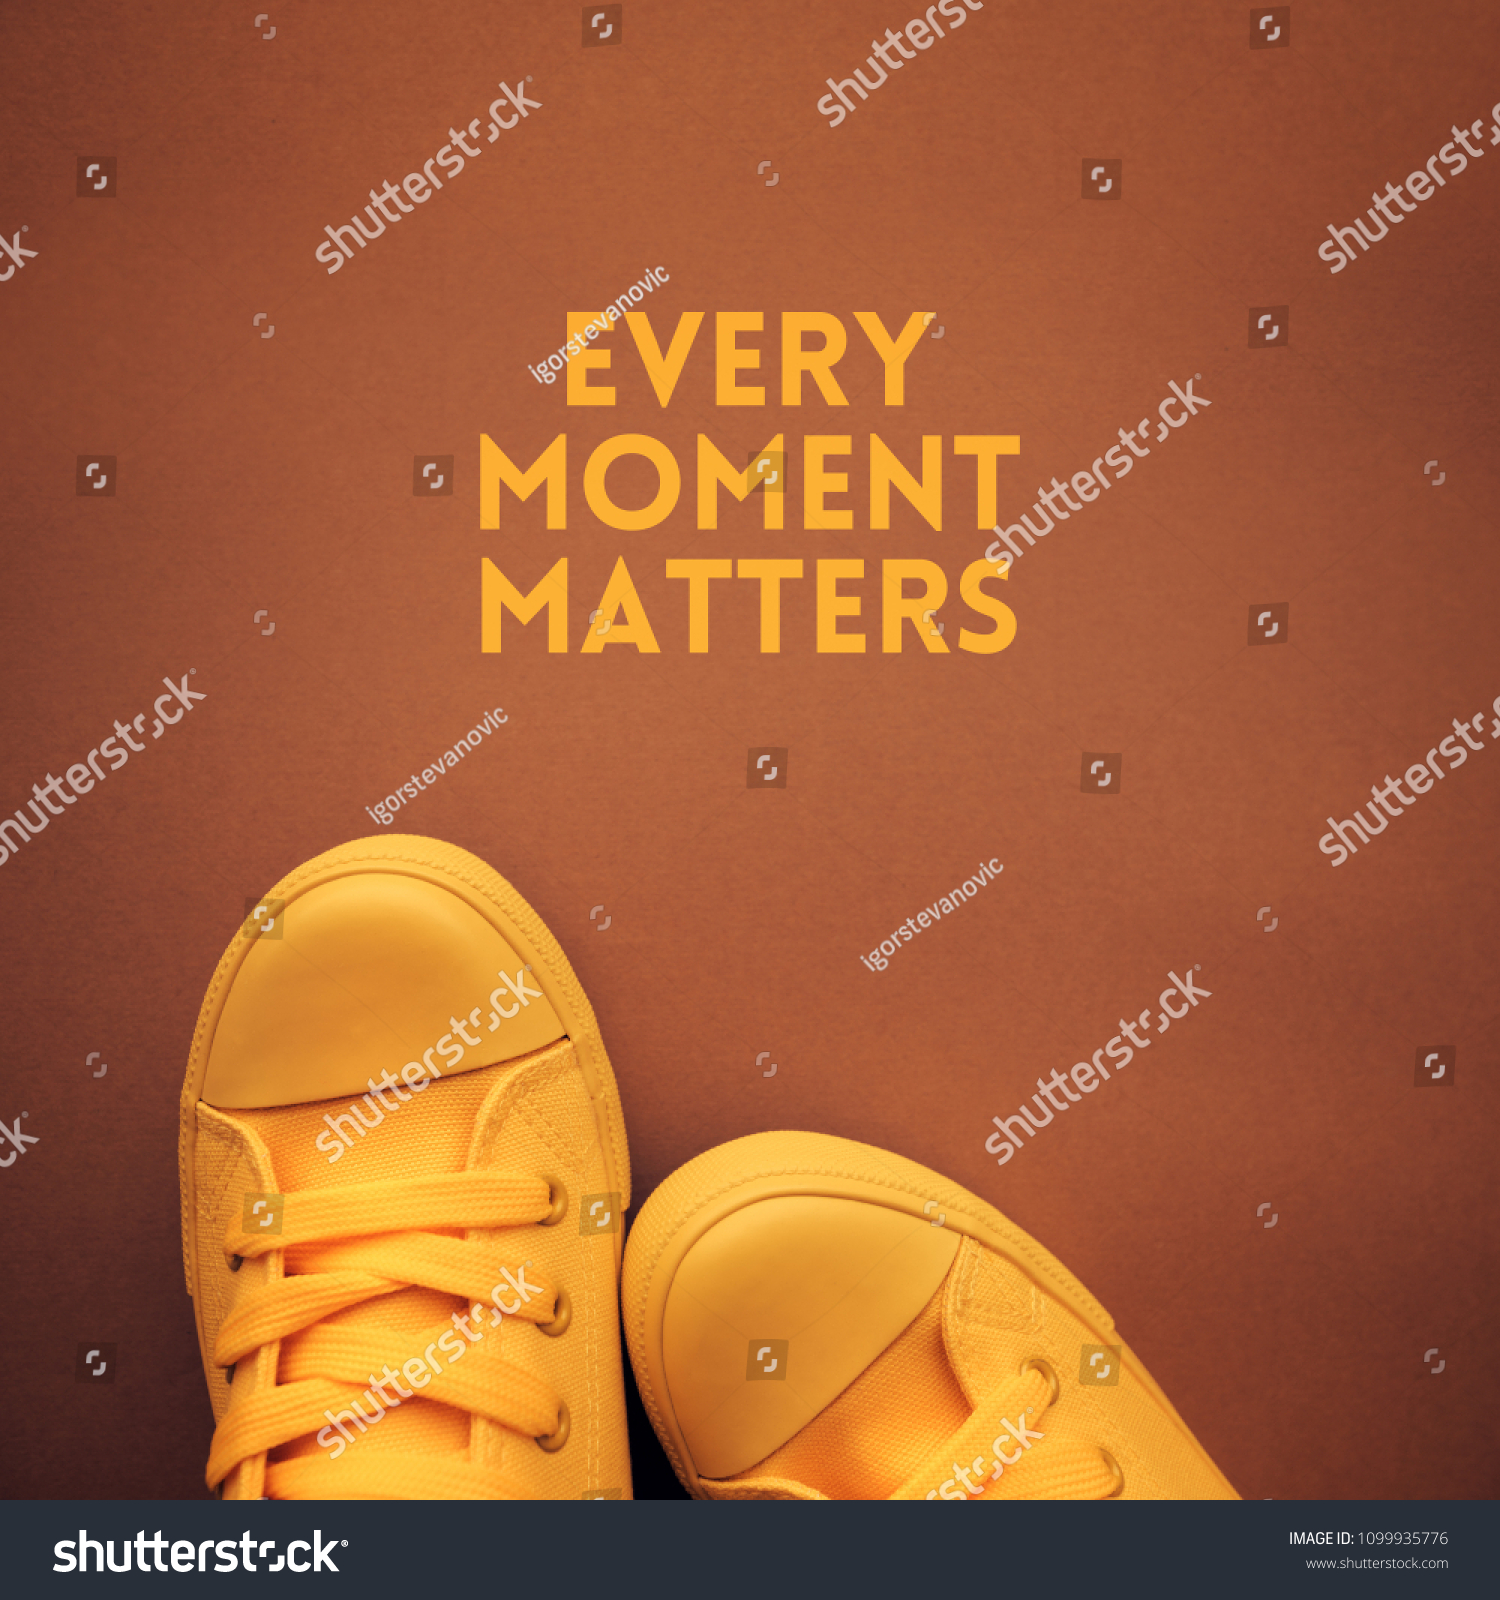 Every moment matters motivational quote, young person in casual canvas shoes standing over the text #1099935776